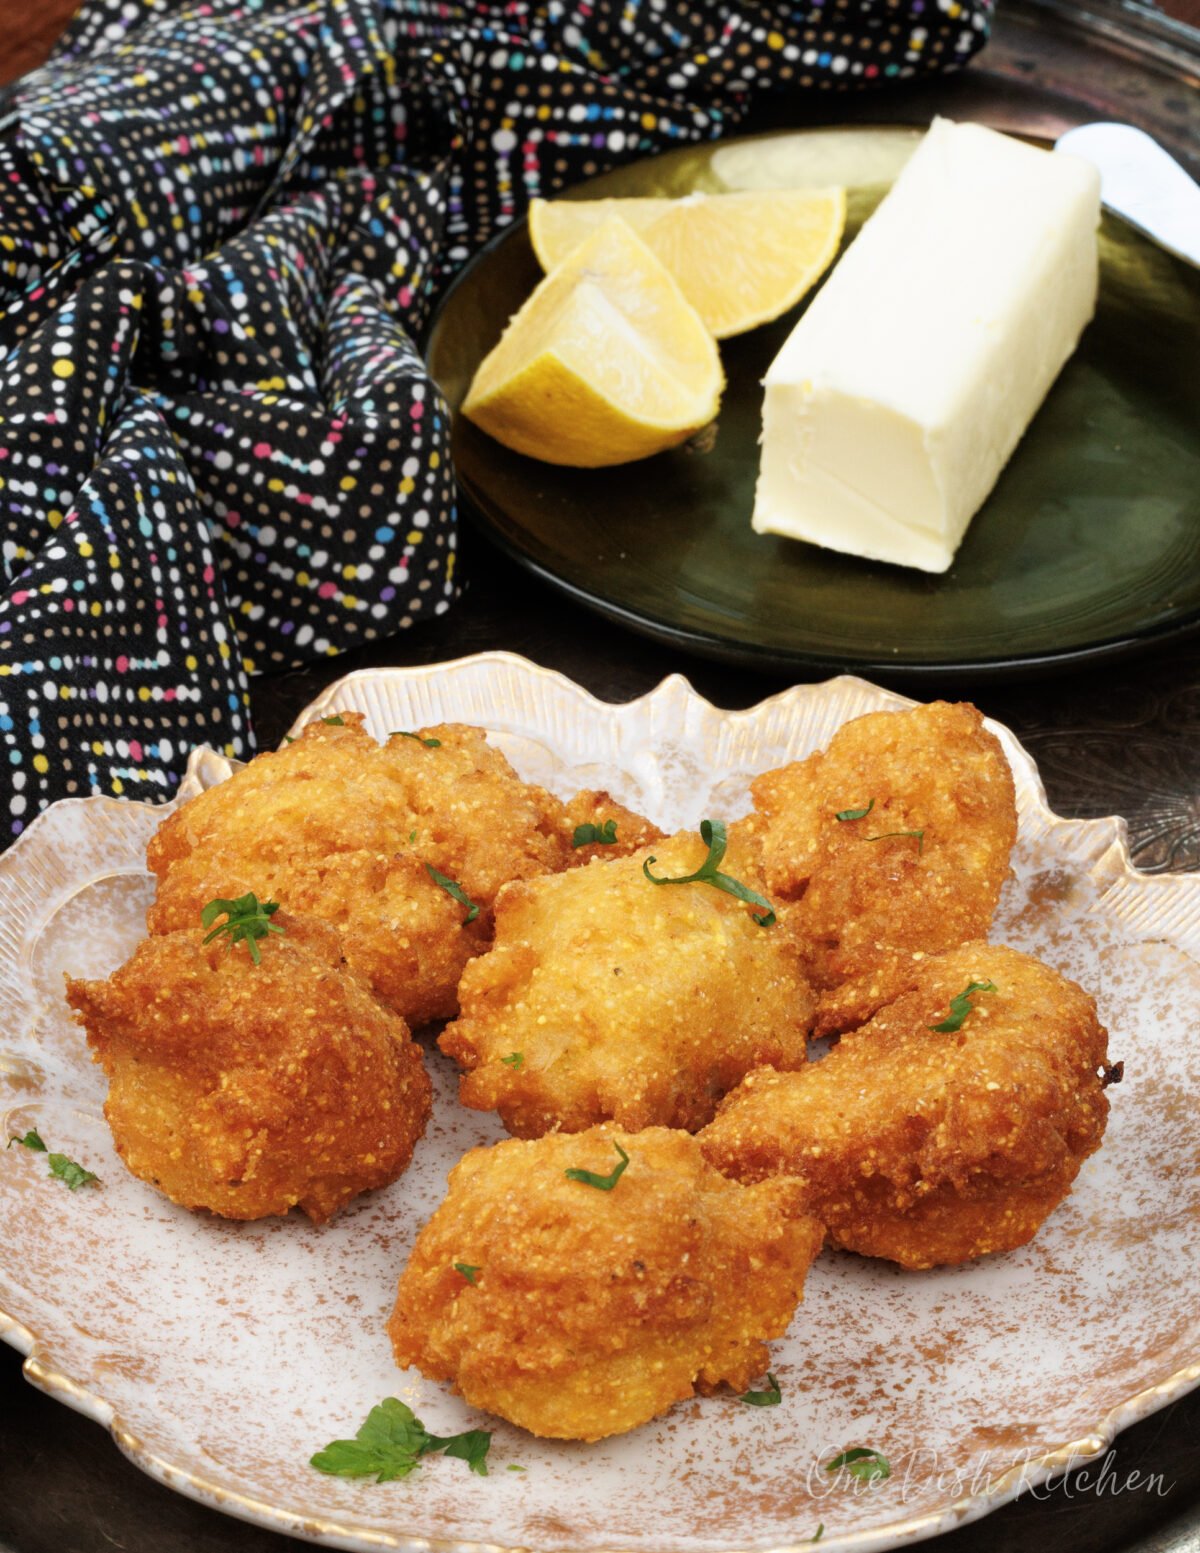 a plate of hush puppies next to a plate with butter on a silver tray.